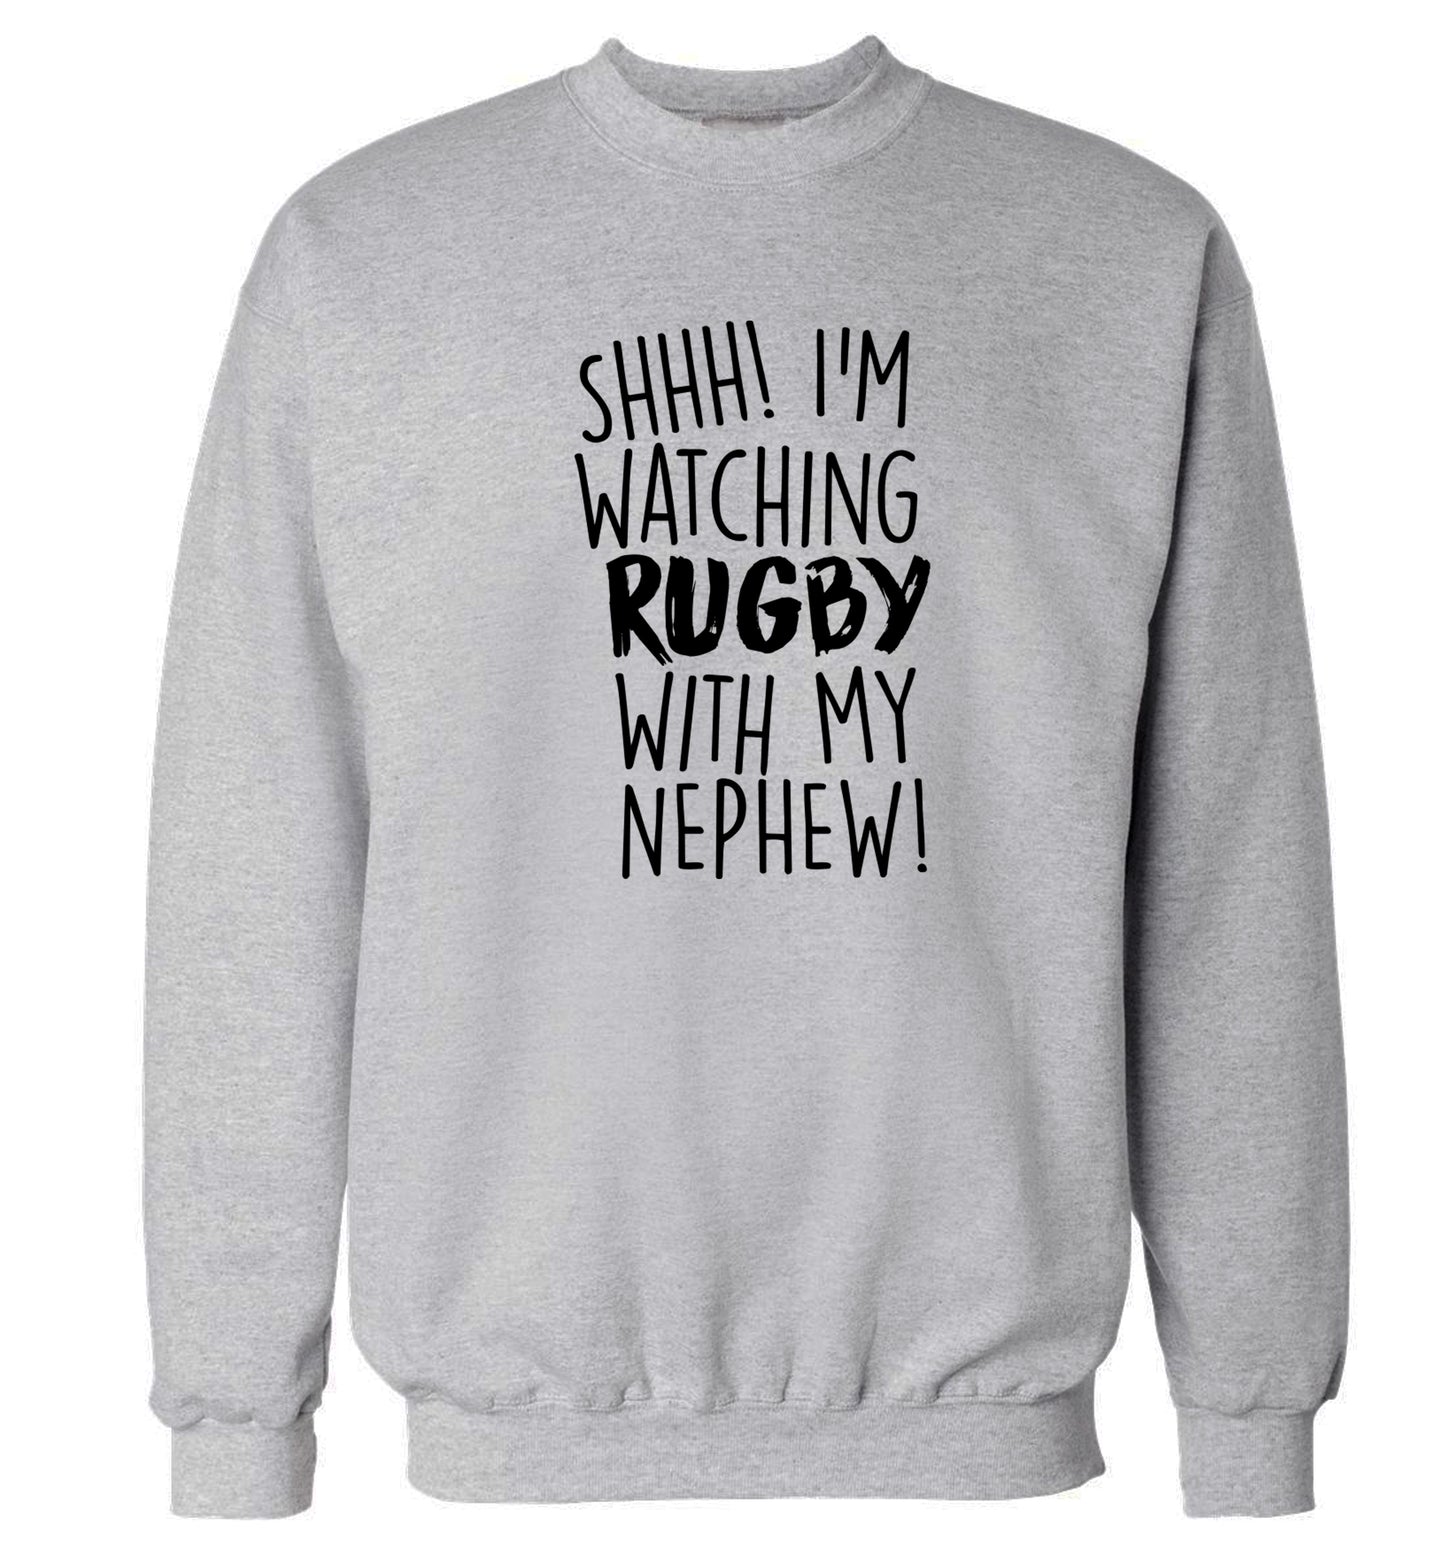 Shh.. I'm watching rugby with my nephew Adult's unisex grey Sweater 2XL